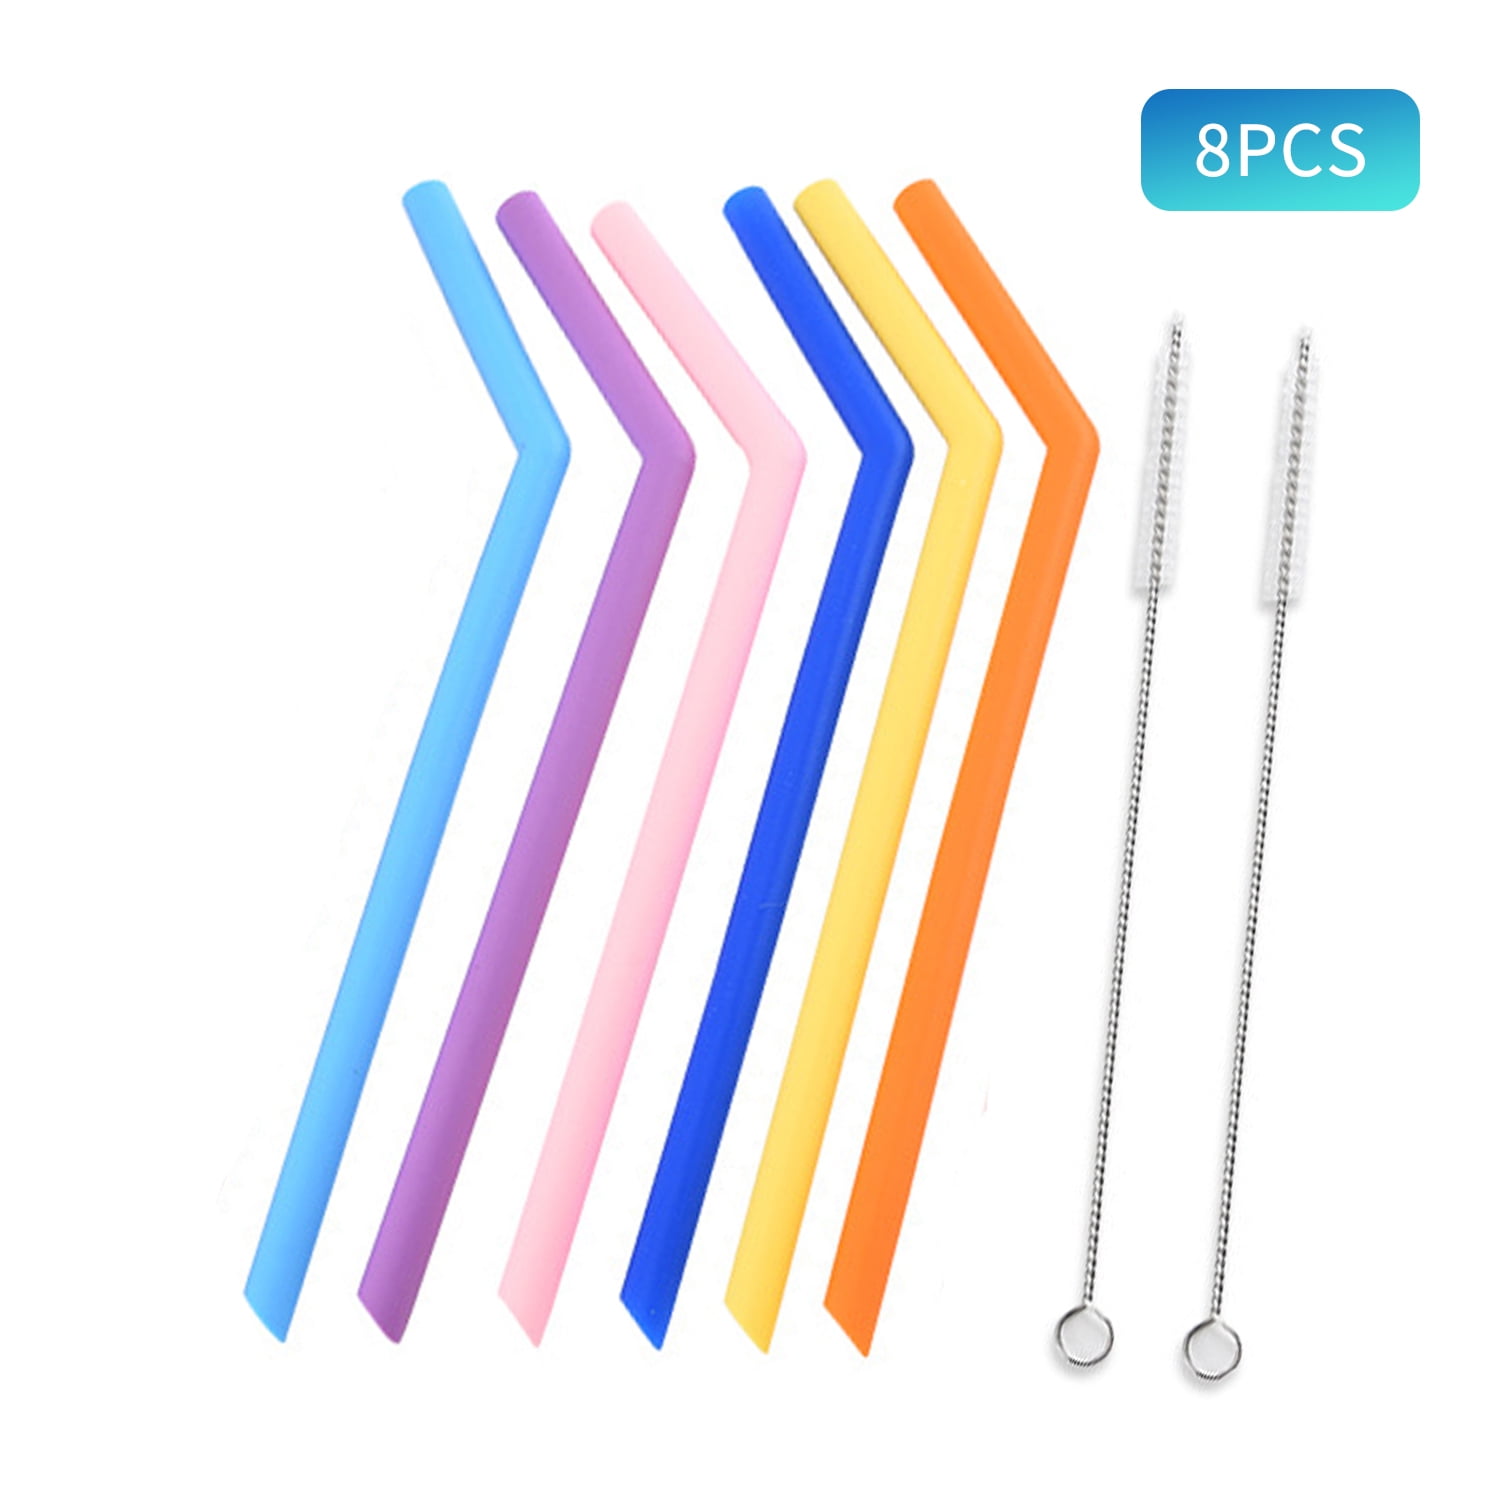 BRUSH Details about   4 X STRAWS ENVIRONMENTALLY FRIENDLY RESUABLE FOOD GRADE SILICONE,BPA FREE 